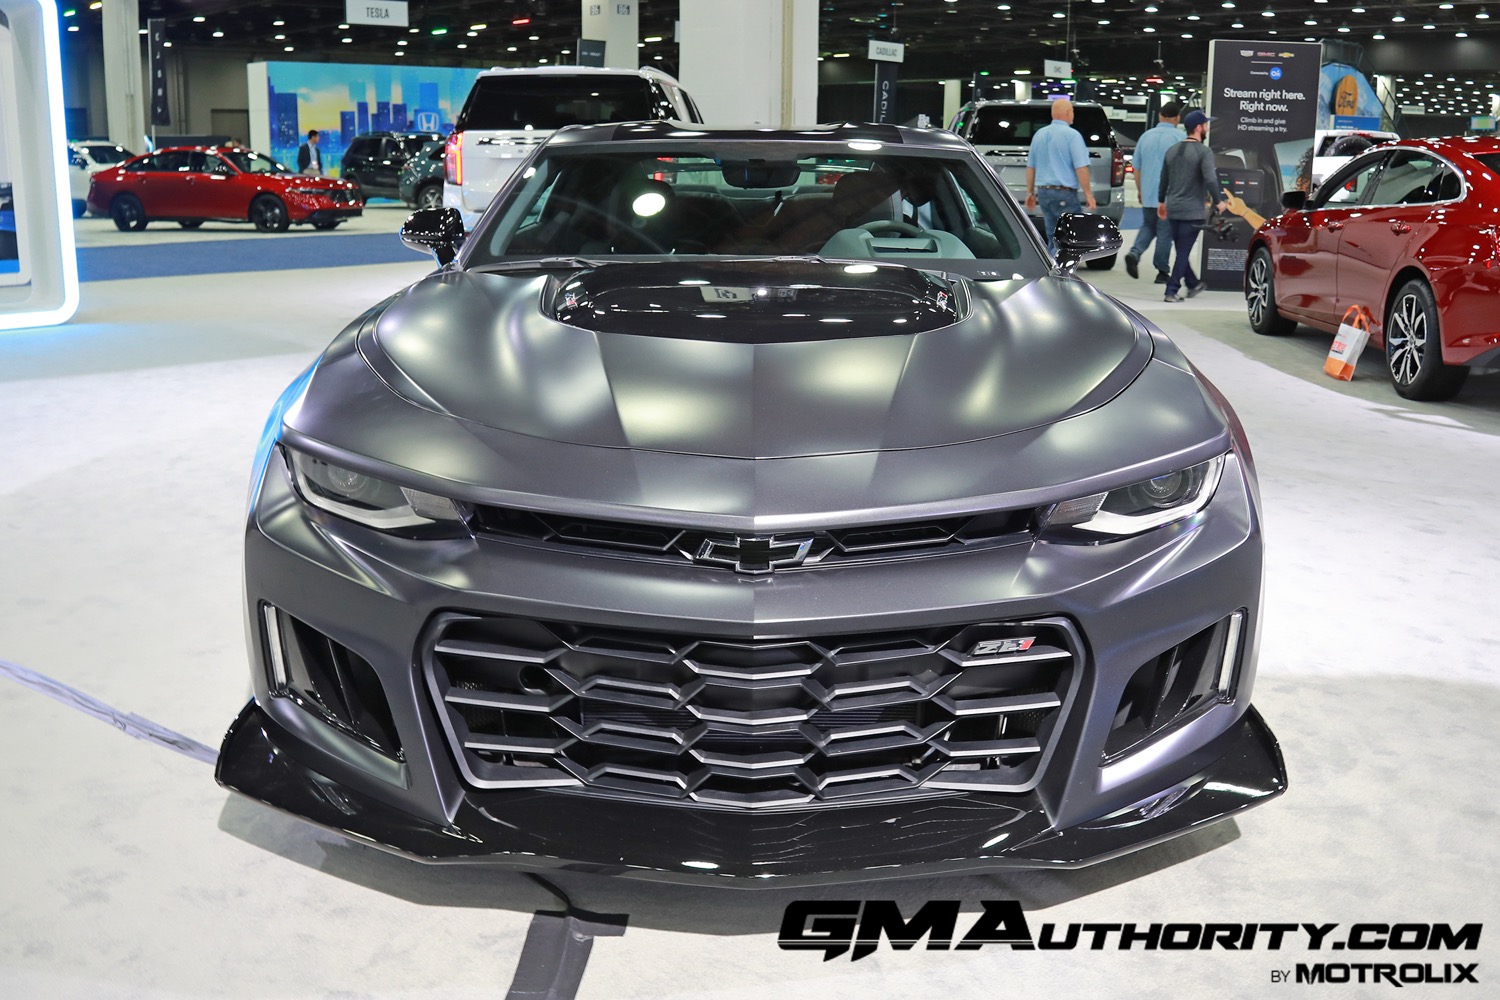 2024 Chevrolet Camaro ZL1 Collector Edition Coupe Panther Black Matte GNW 2023 NAIAS Live Photos Exterior 004 Front Headlights Grille 